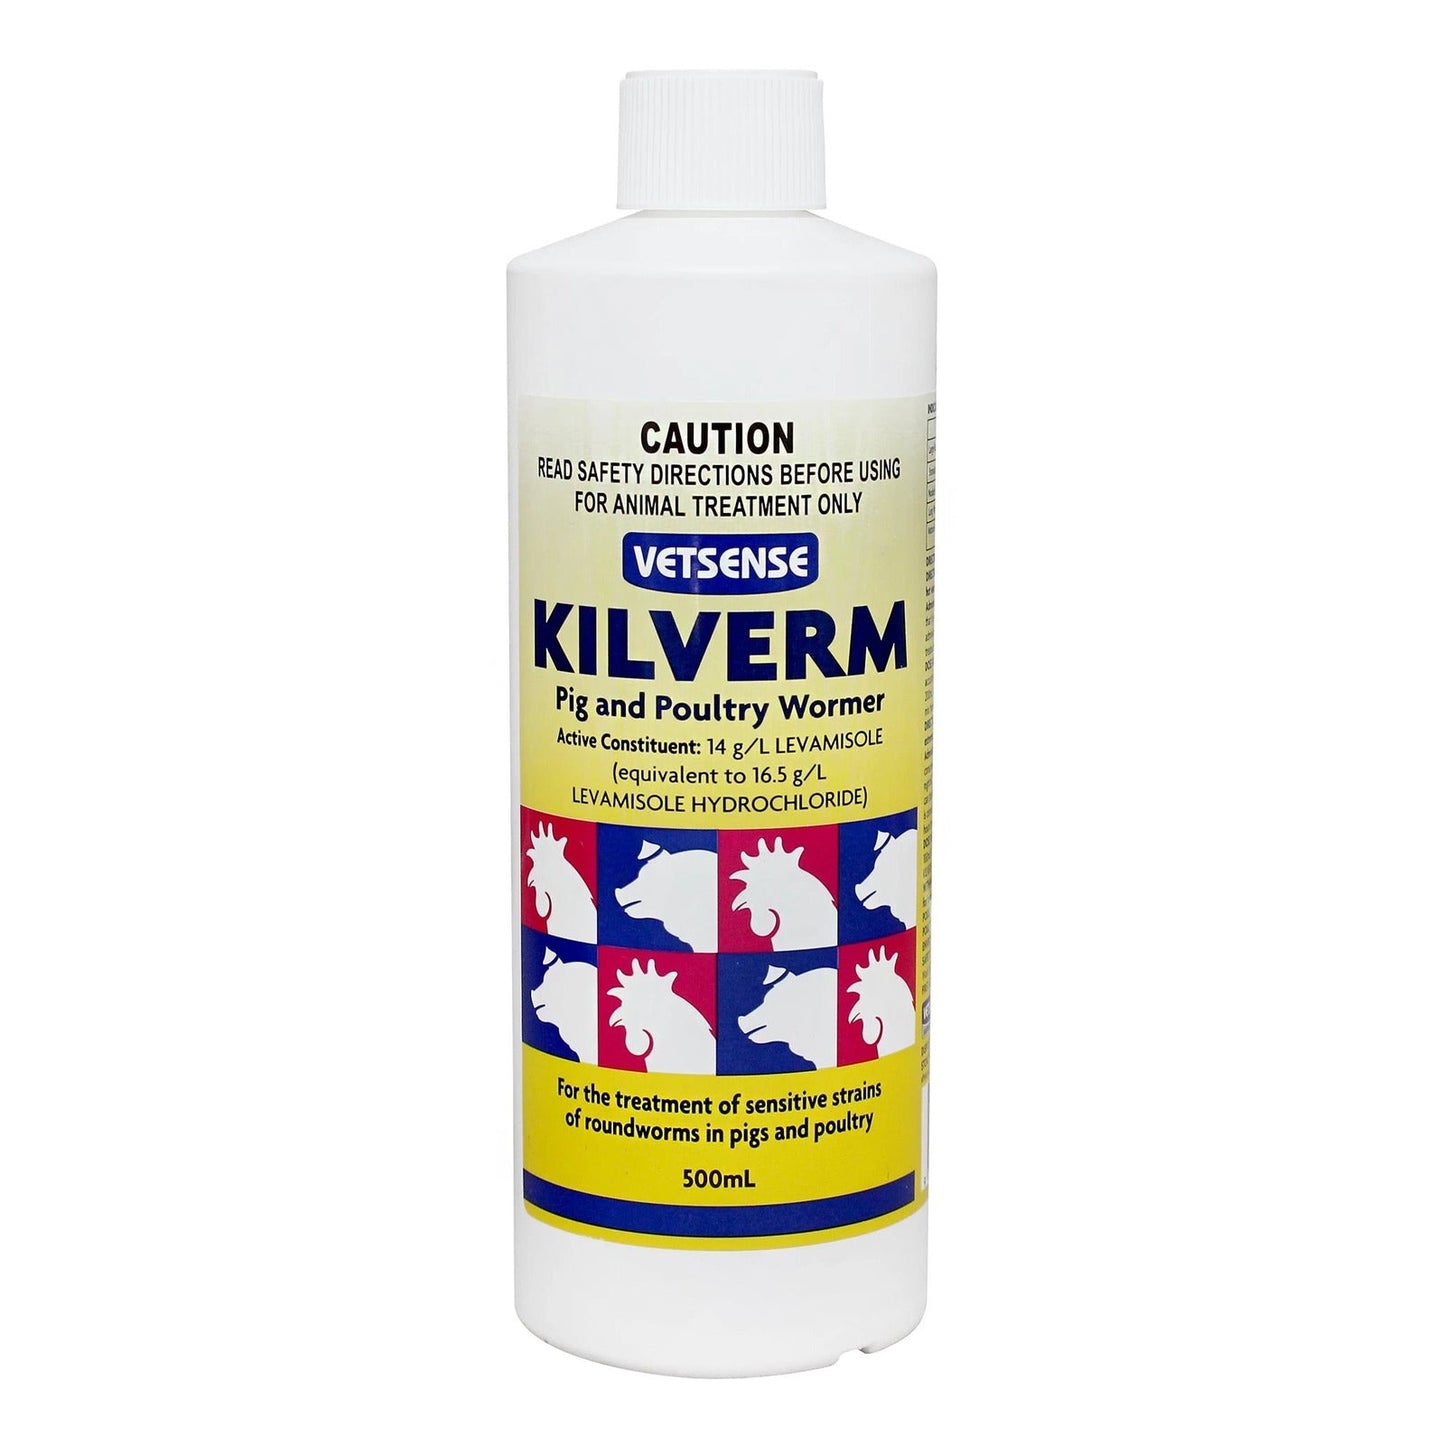 Kilverm Pig & Poultry Wormer